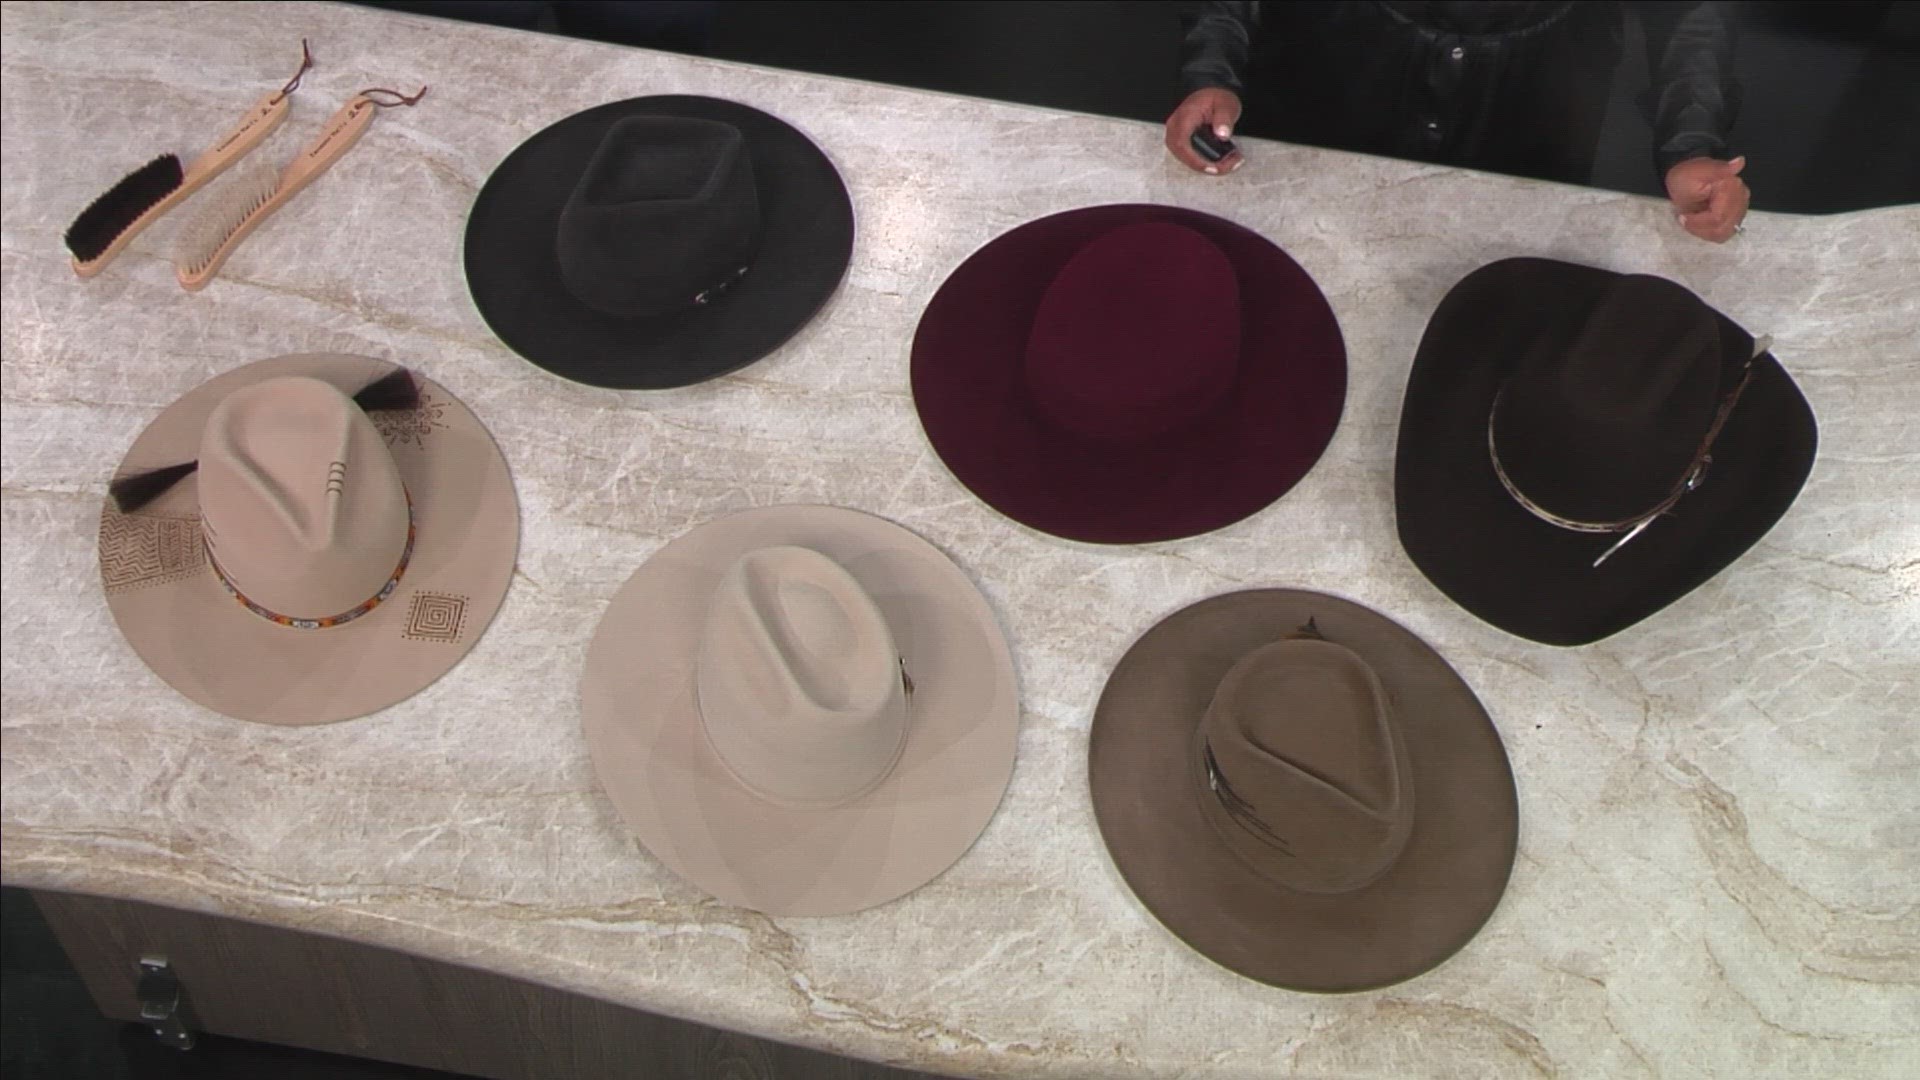 Kyle Theret, owner of Encounter Hat Co., shares tips for creating a custom hat this holiday season.